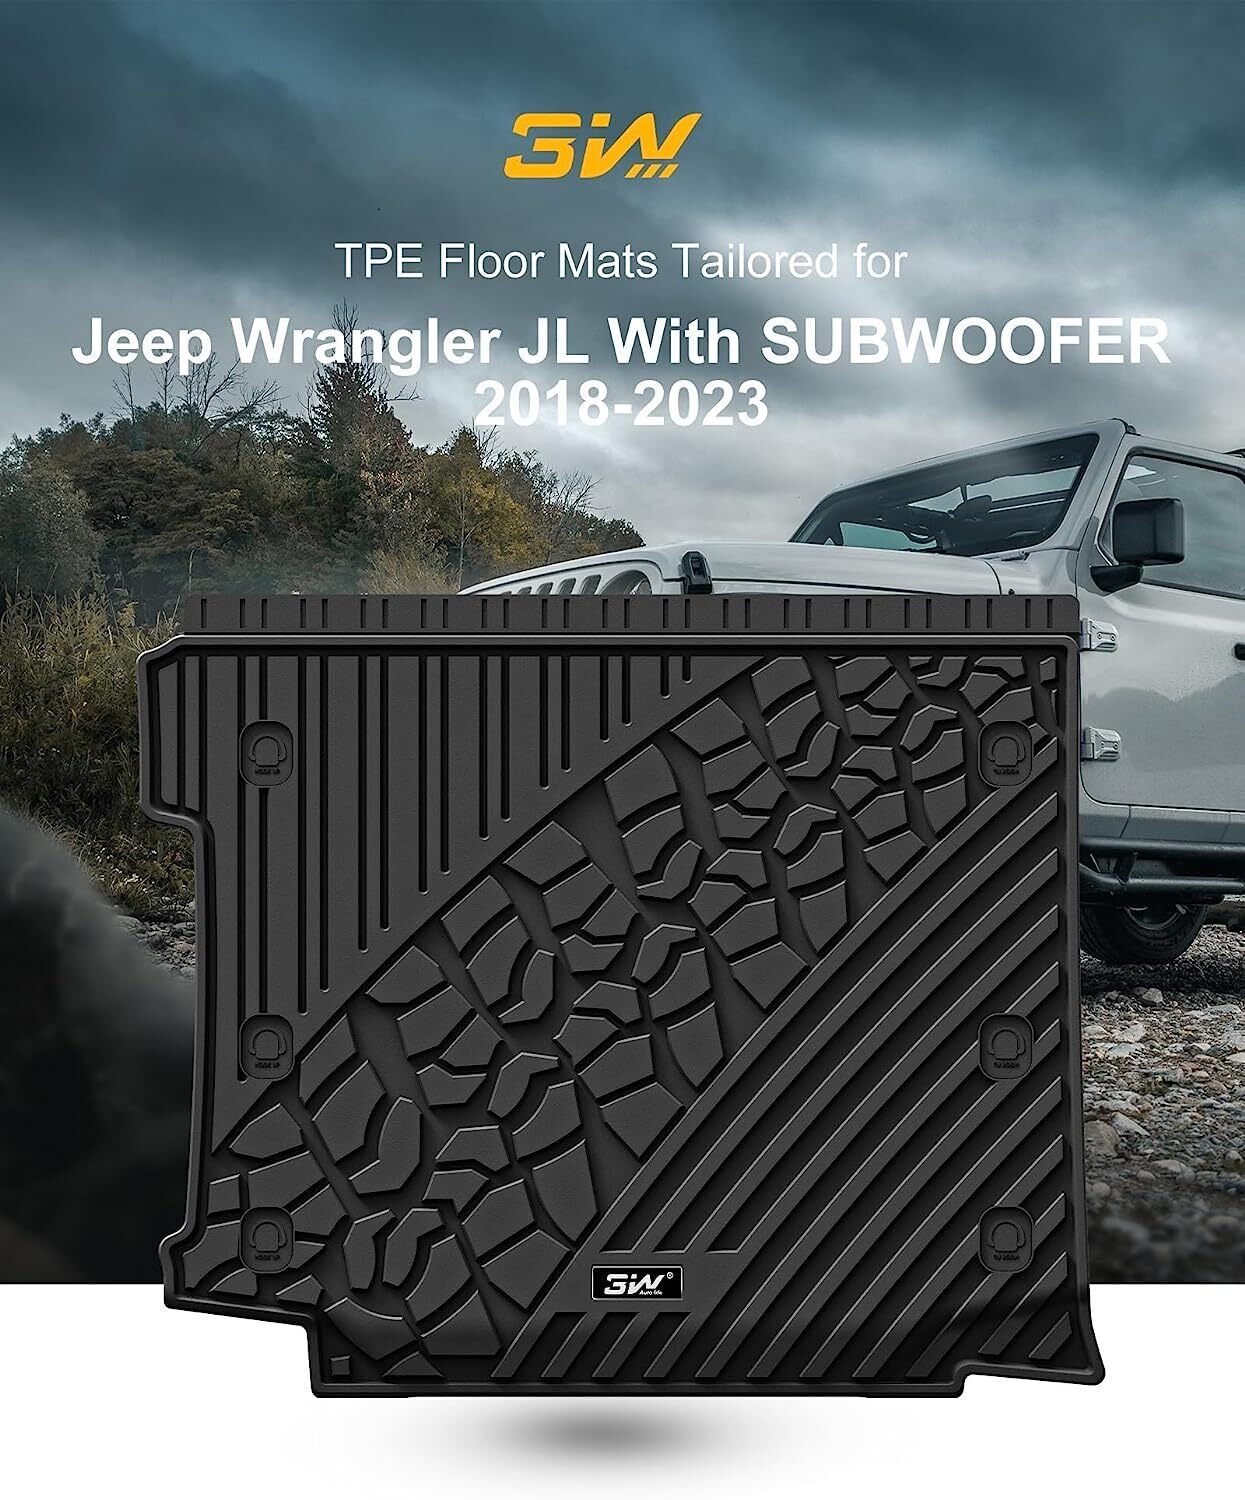 3W Auto Trunk Cargo Liner Floor Mat for Jeep Wrangler JL 2018-22 with subwoofer